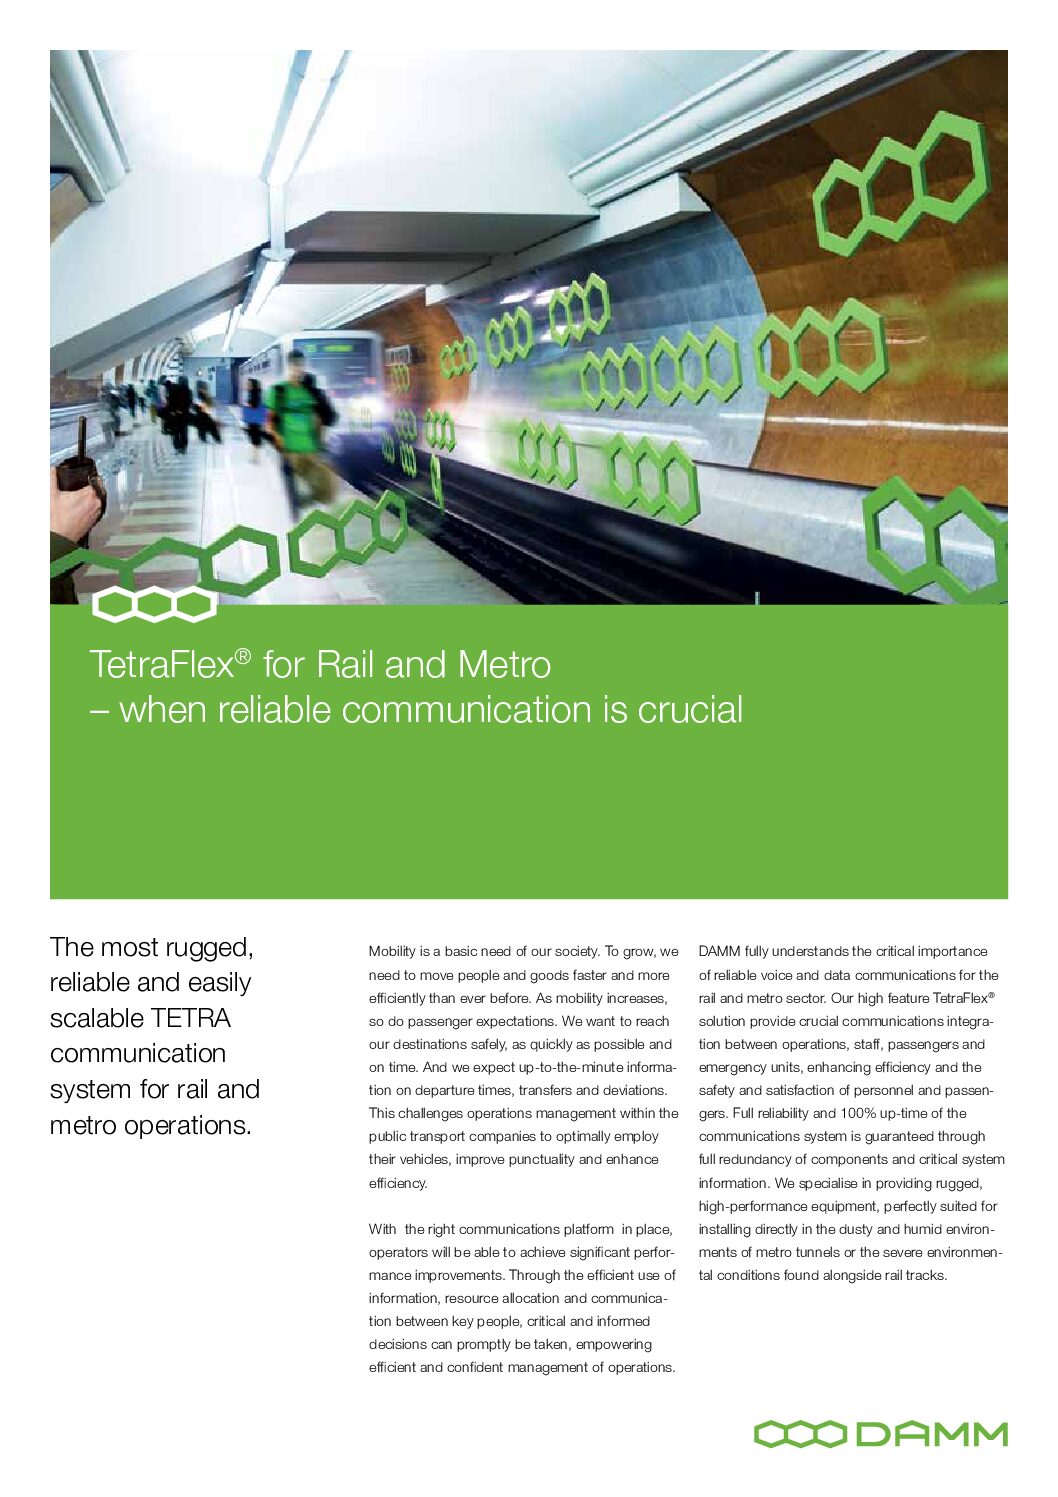 TetraFlex® for Rail and Metro – When Reliable Communication Is Crucial